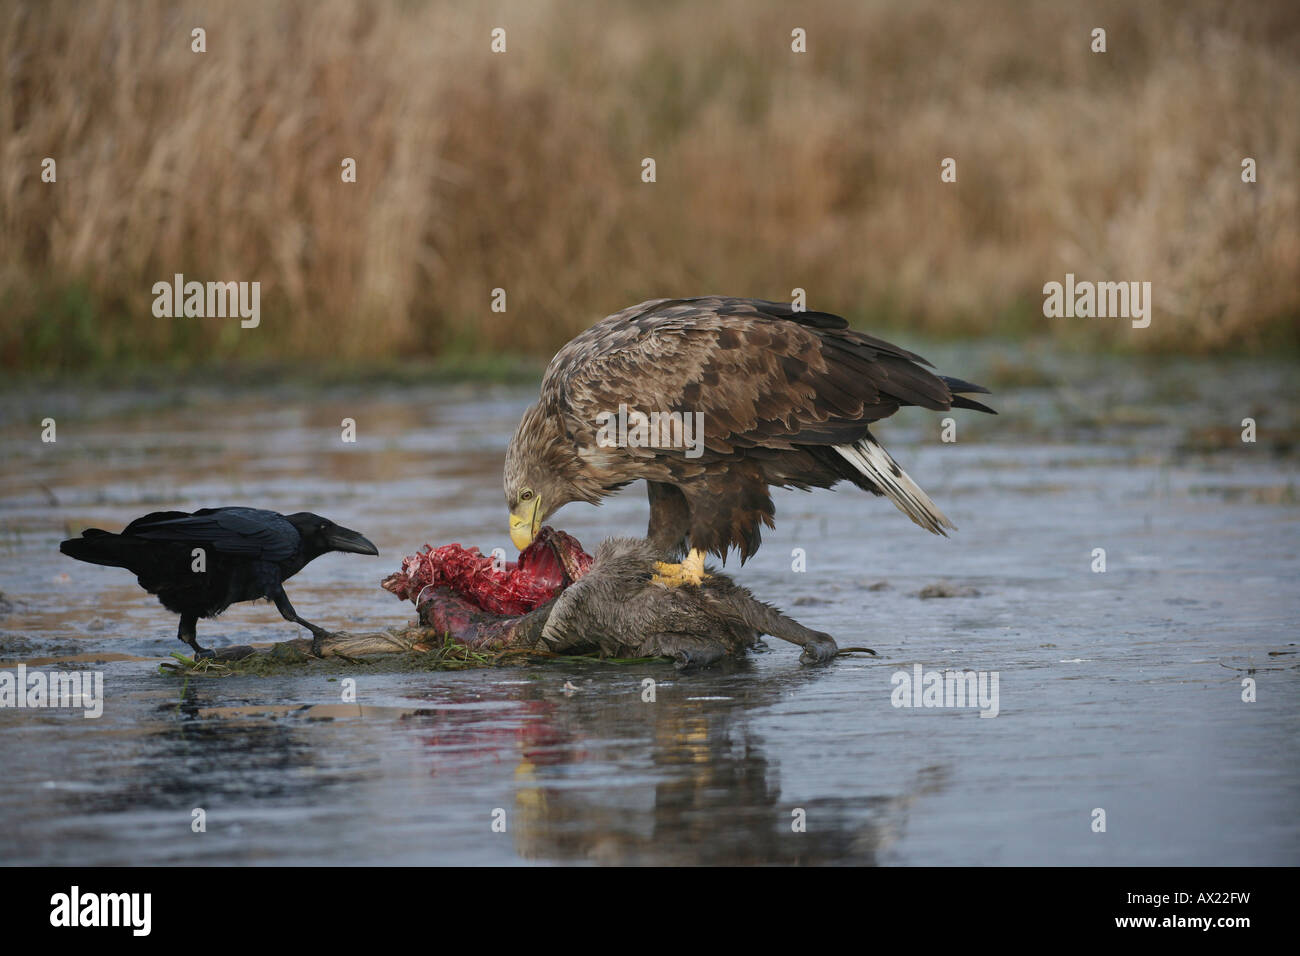 White-tailed Eagle or Sea Eagle (Haliaeetus albicilla) and Common Raven (Corvus corax) perched on an icy surface, feeding on de Stock Photo